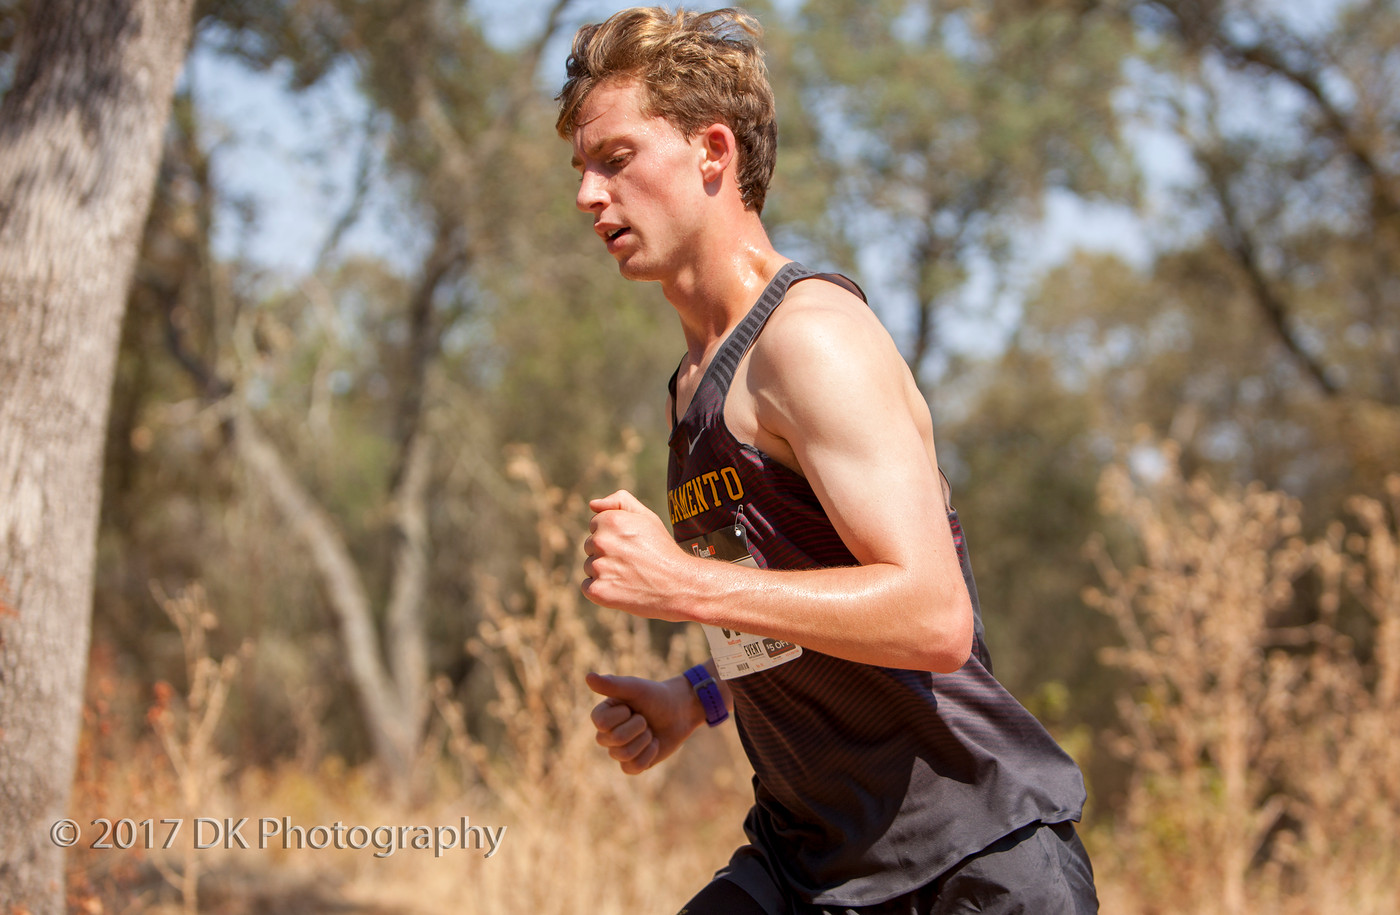 Men's Cross Country finishes 5th at the Big 8 Preview